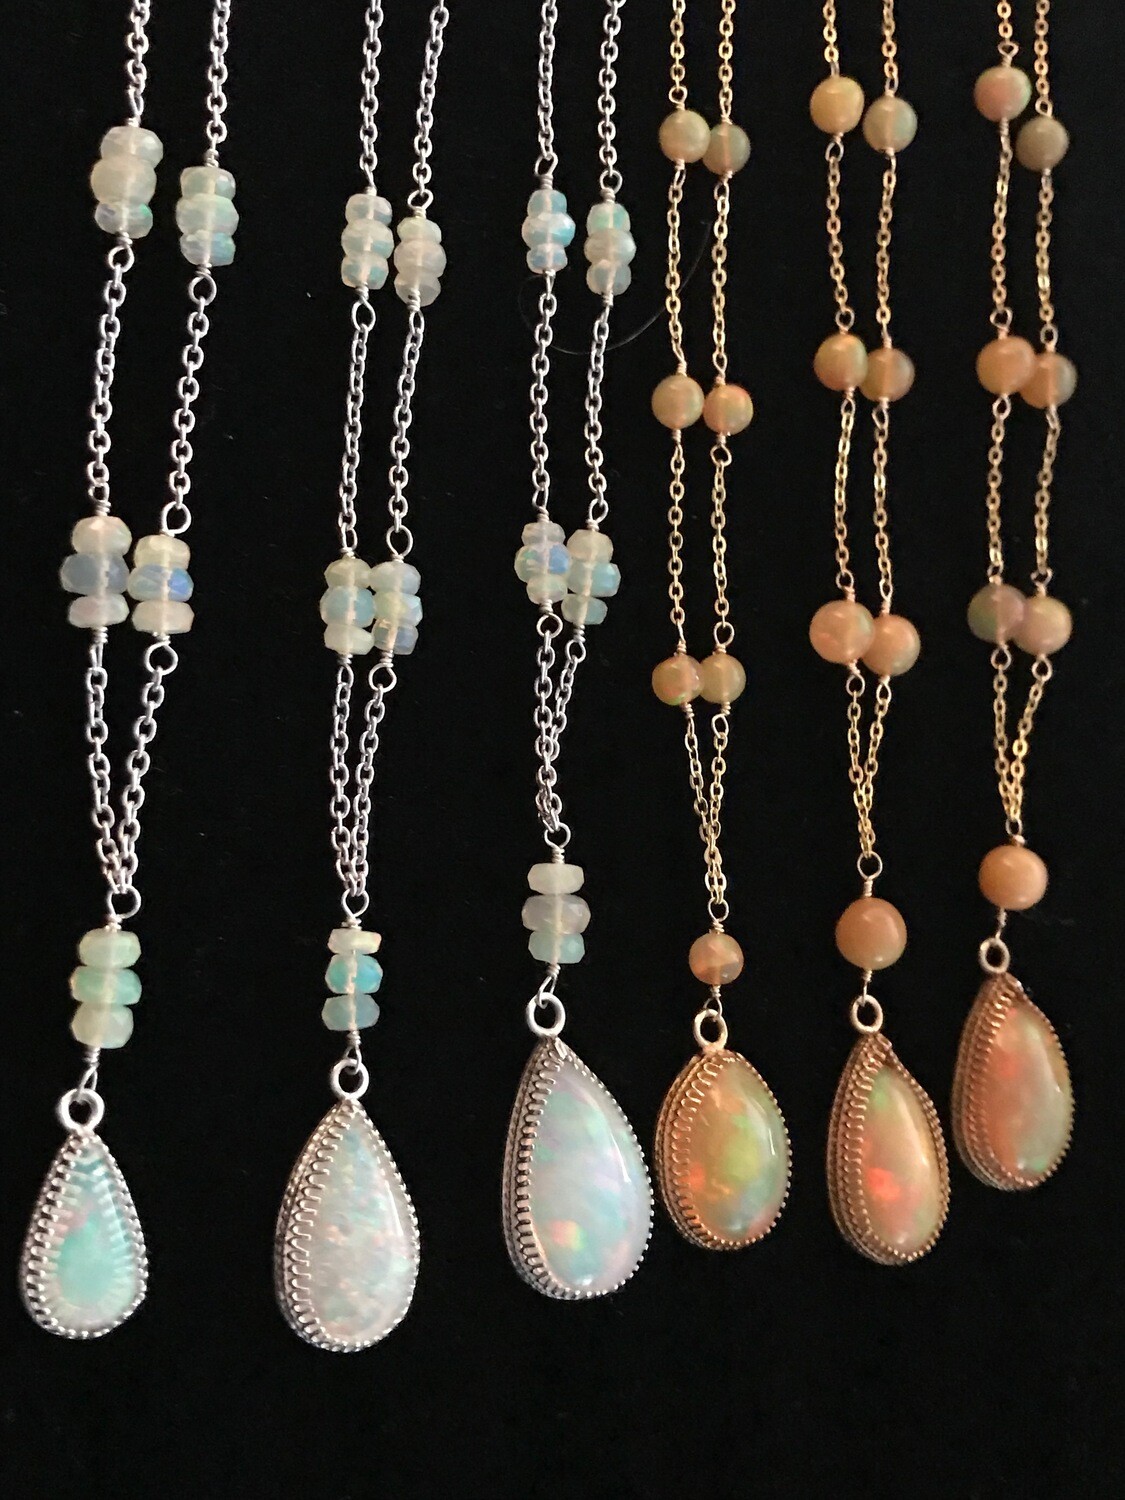 White Opal Necklaces